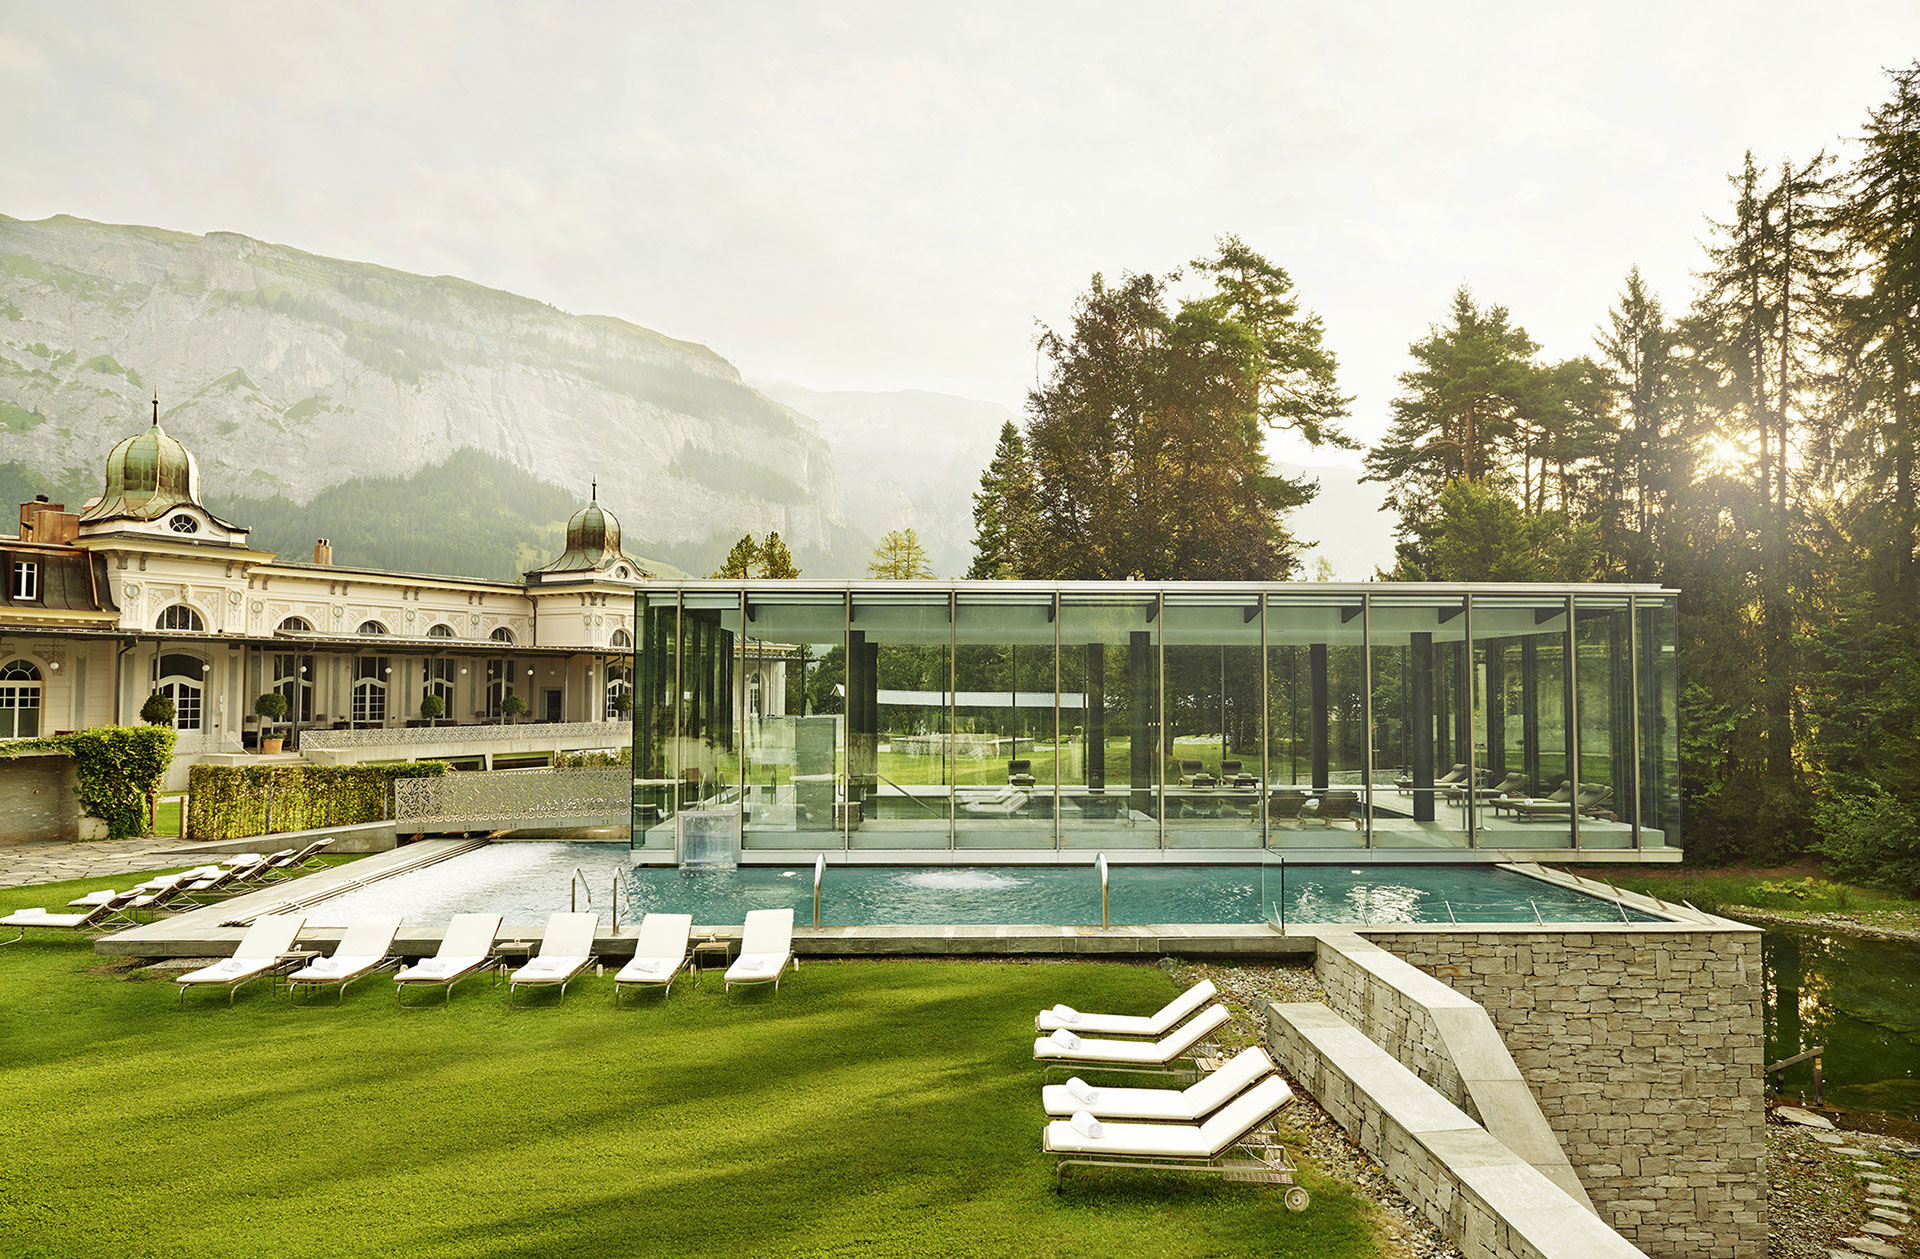 exterior shot of the waldhaus flims spa building and pool. The building is white with decorative fixtures at the top. The pool is indoor and outdoor. The indoor portion of the pool is encased in a glass fixture. The outside portion of the pool is lined with white lounge chairs. In the distance are evergreen trees and the swiss alps.